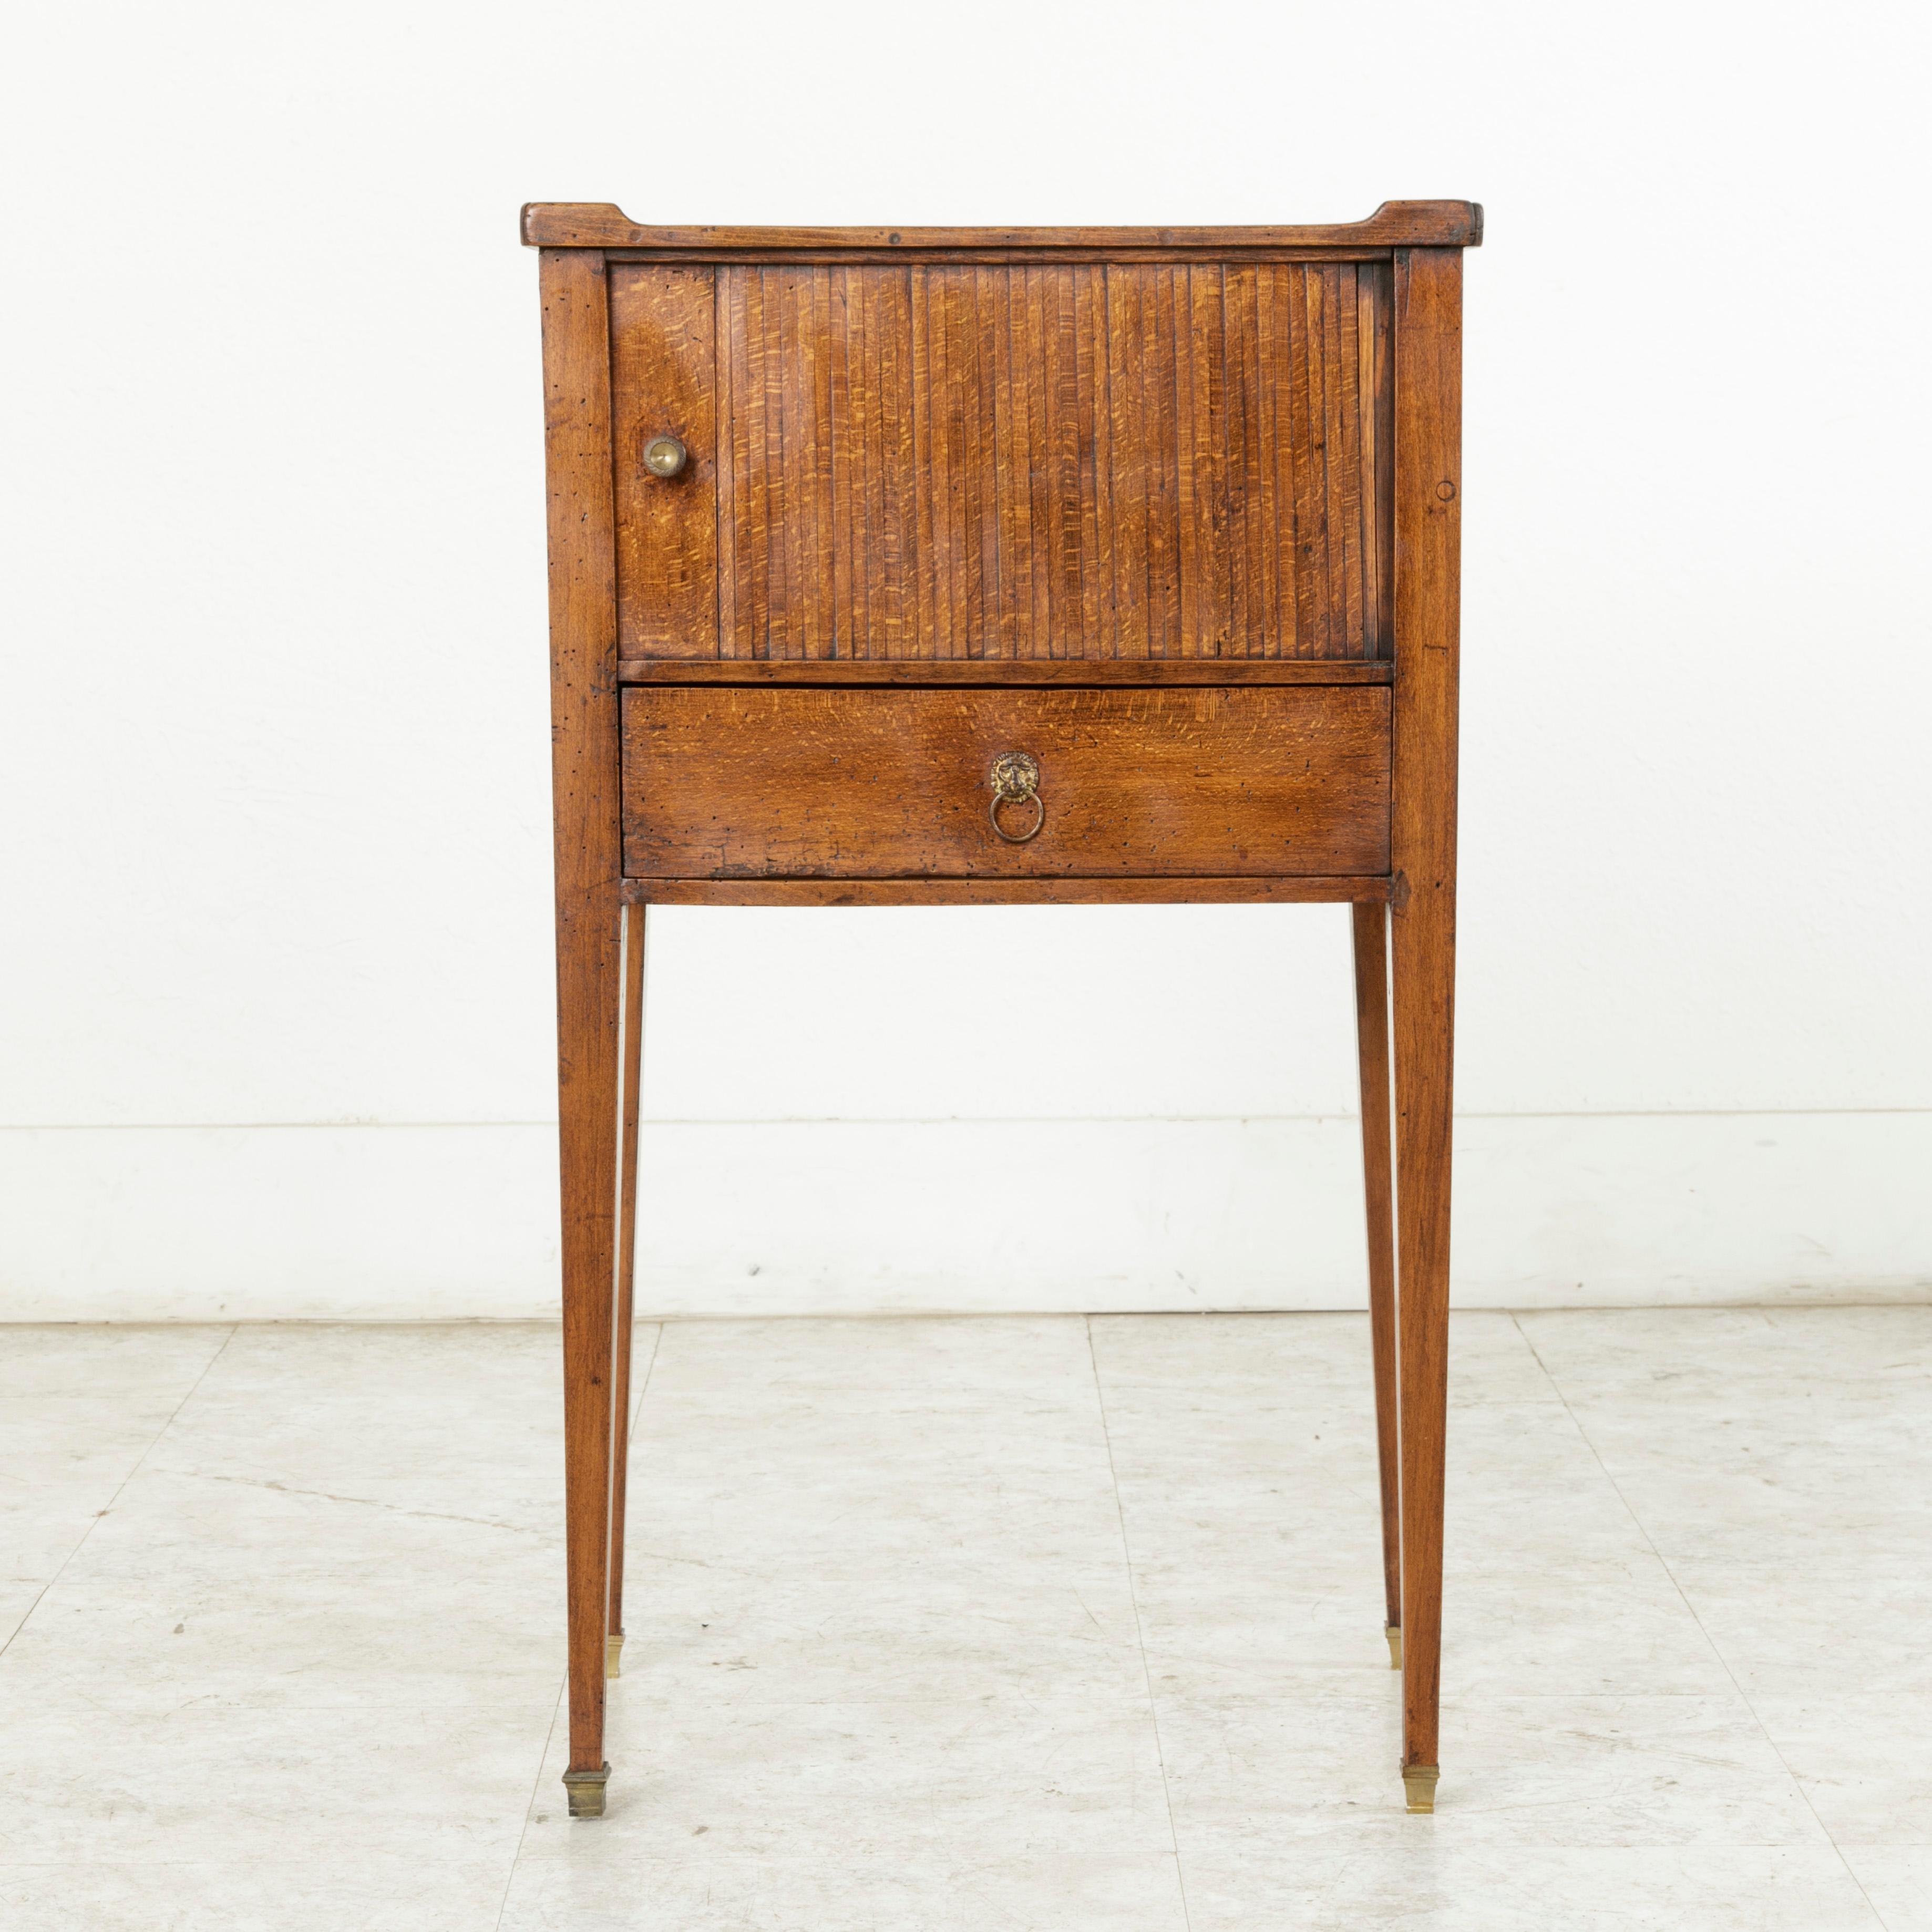 This 18th century French Louis XVI period walnut nightstand or side table features a sliding door referred to as a curtain or Rideau in French. The sliding door allows for access to its interior compartment. A single drawer of dovetail construction